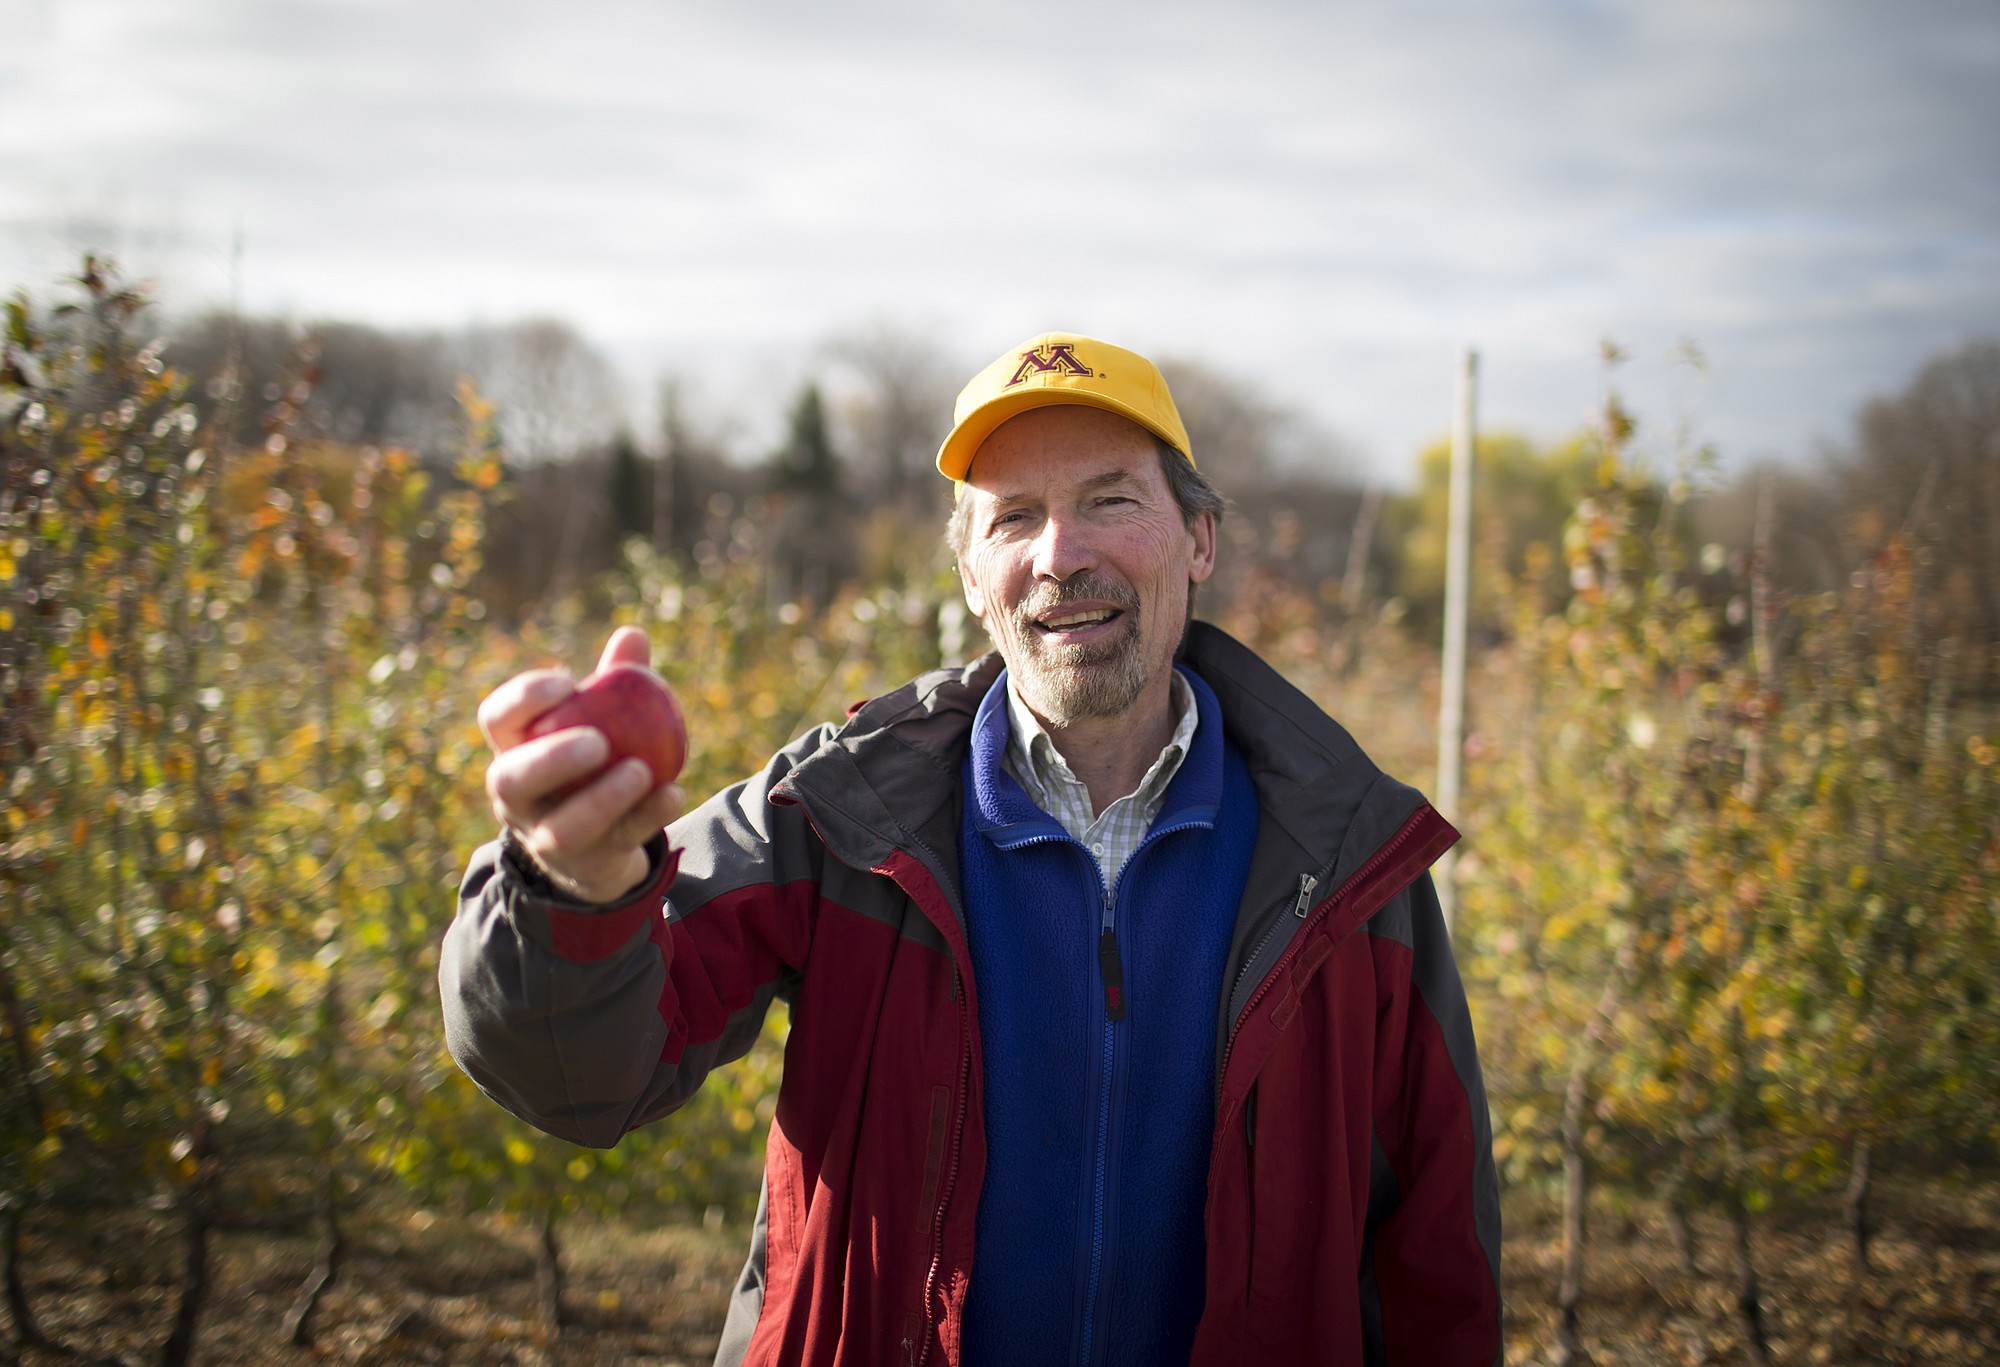 David Bedford, pictured at the University of Minnesota apple orchard in Excelsior, Minn., is looking for the next great apple variety.